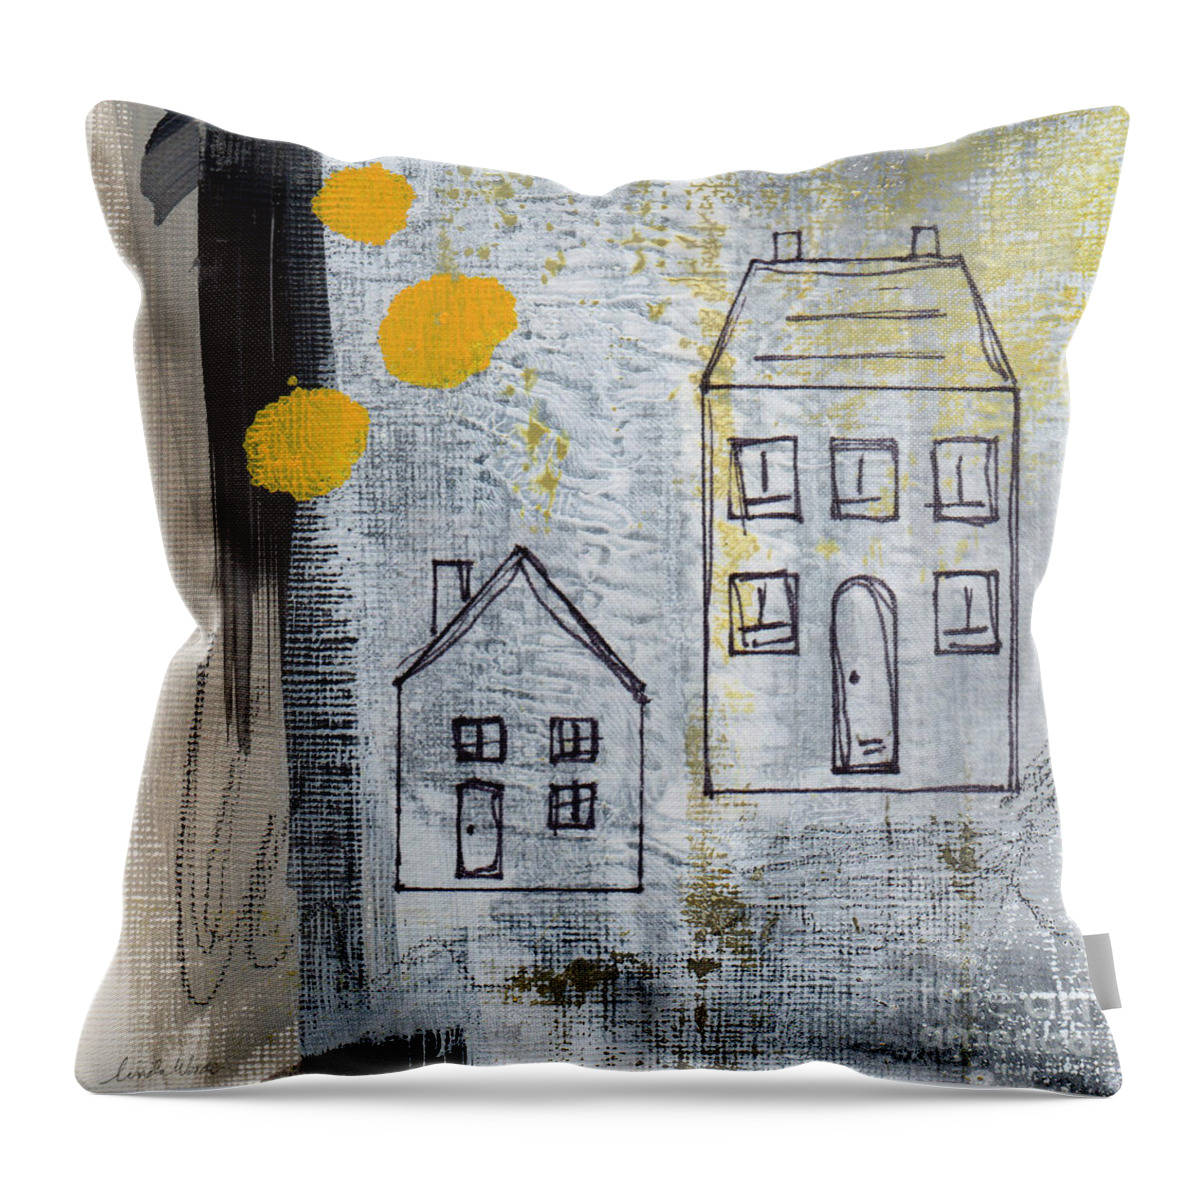 Abstract Throw Pillow featuring the painting On The Same Street by Linda Woods